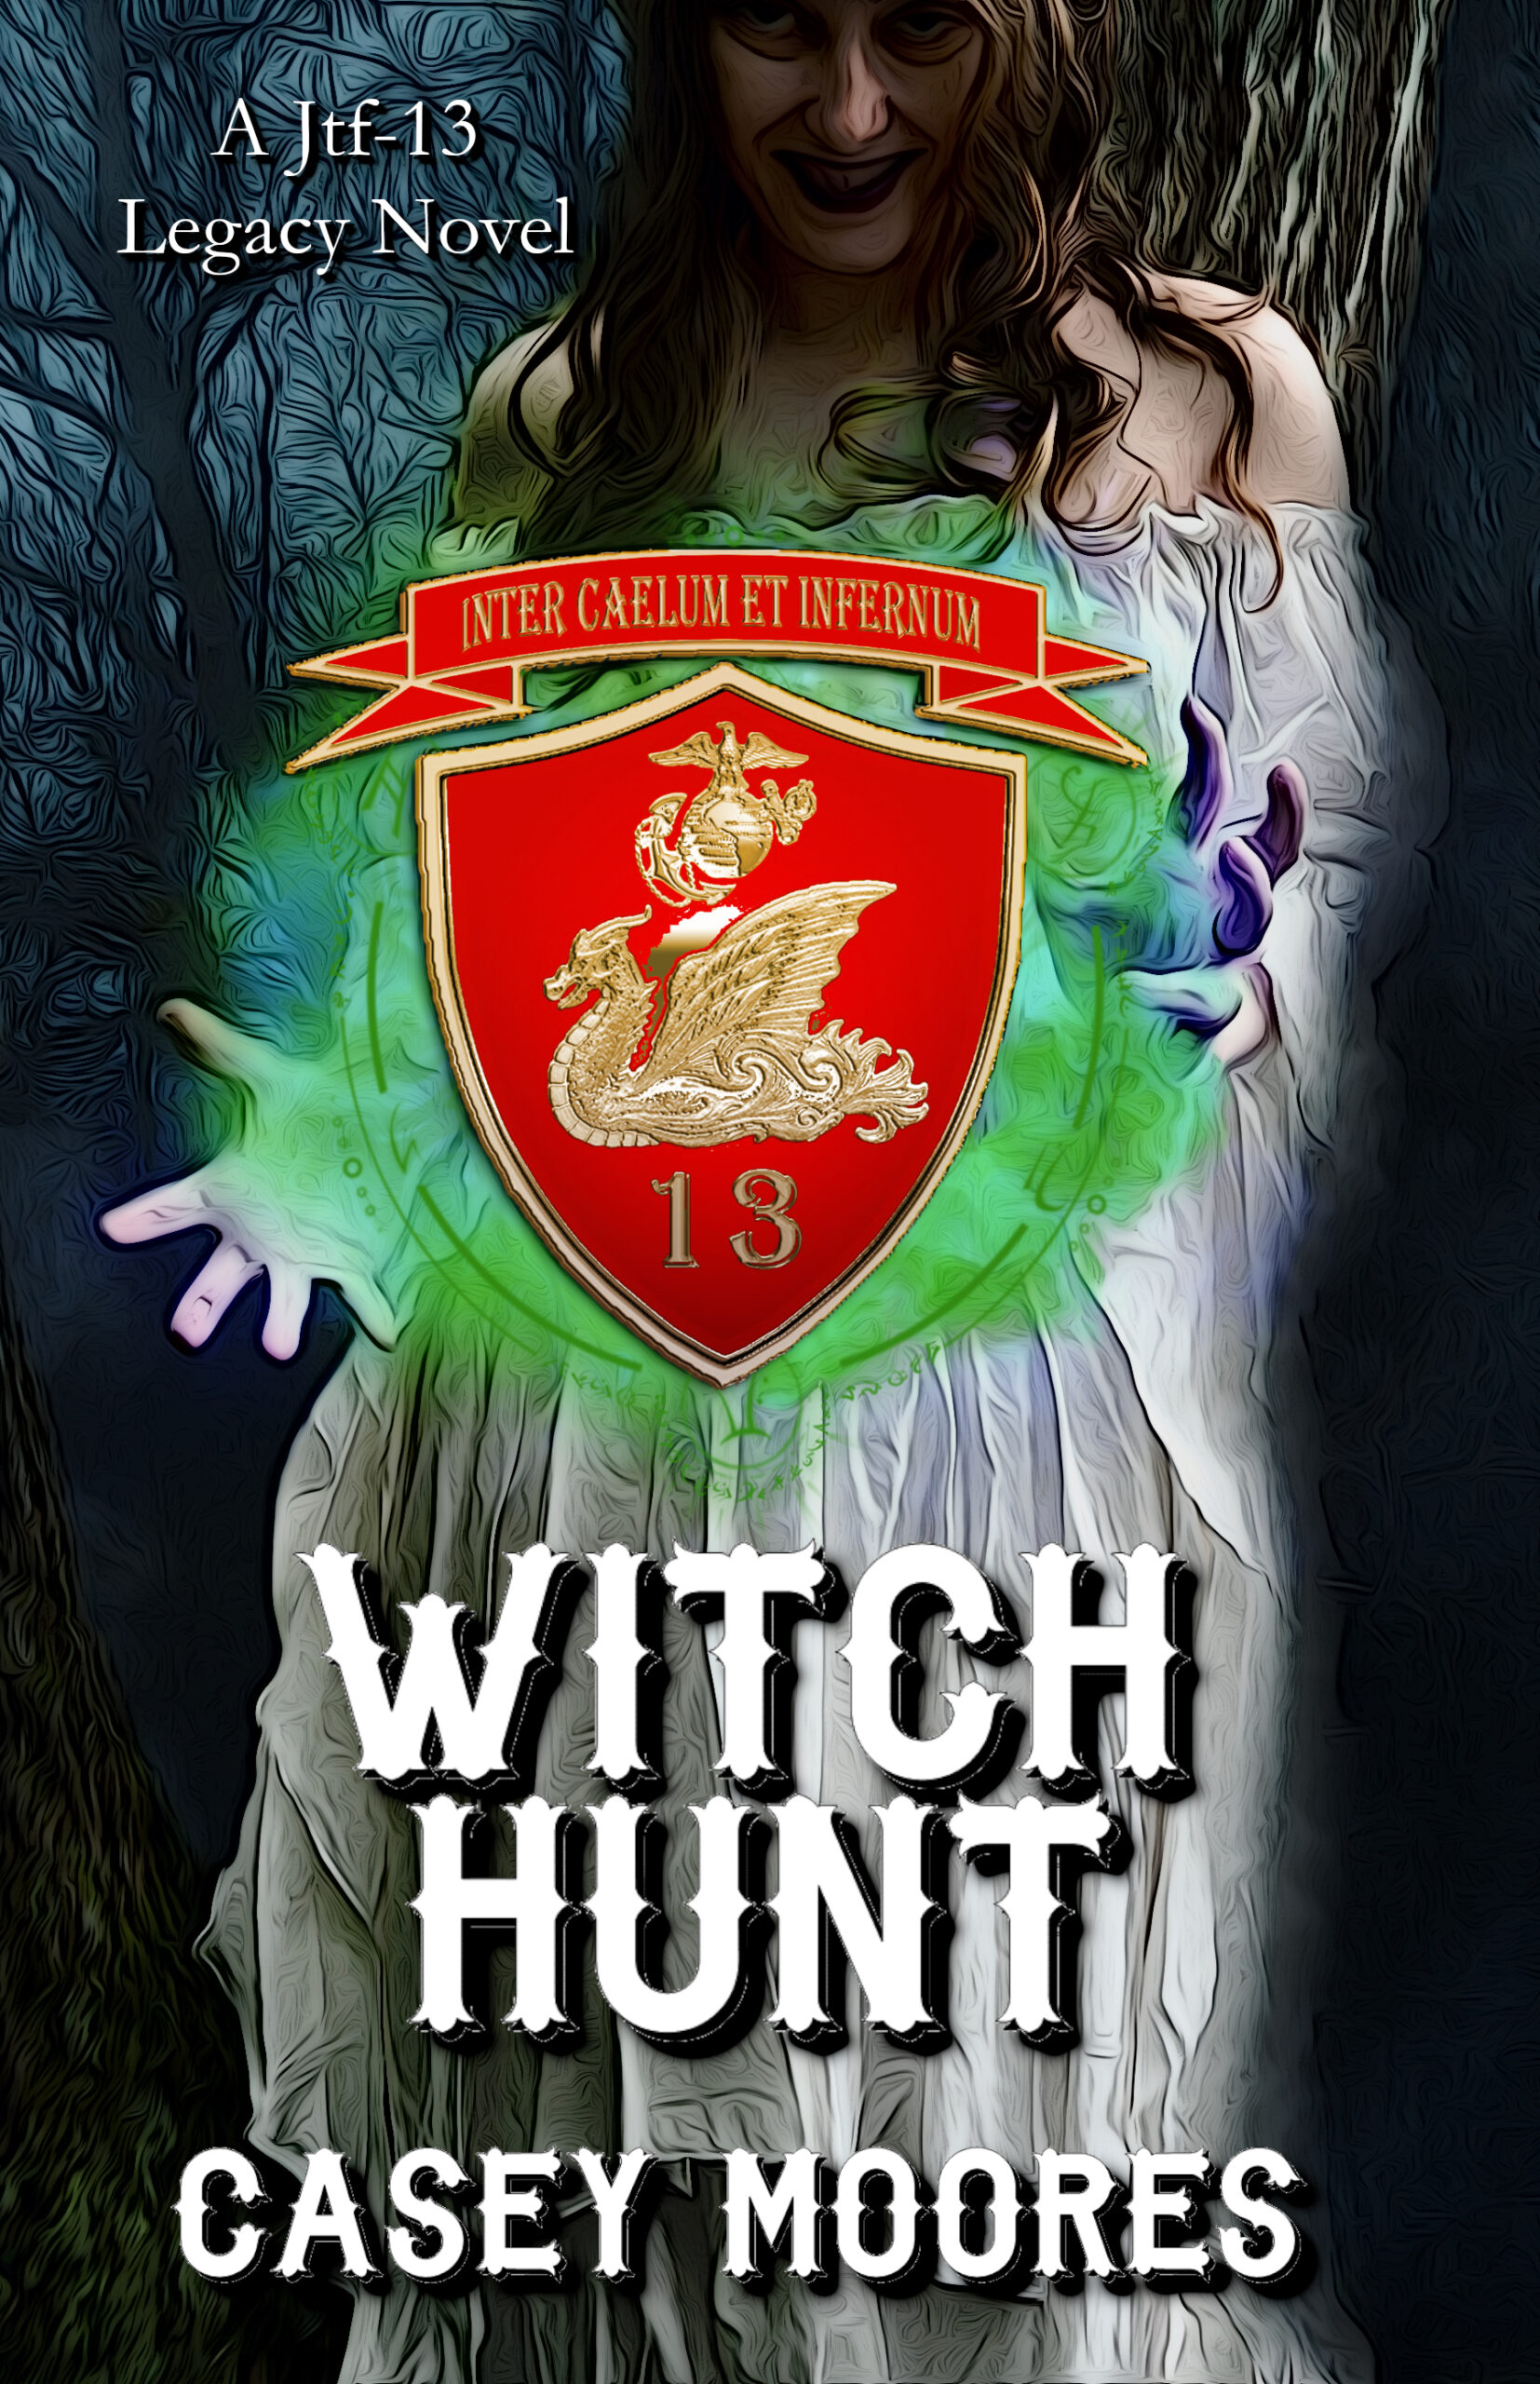 A new JTF-13 novel is born! Witch Hunt, by Casey Moores now available on Amazon!